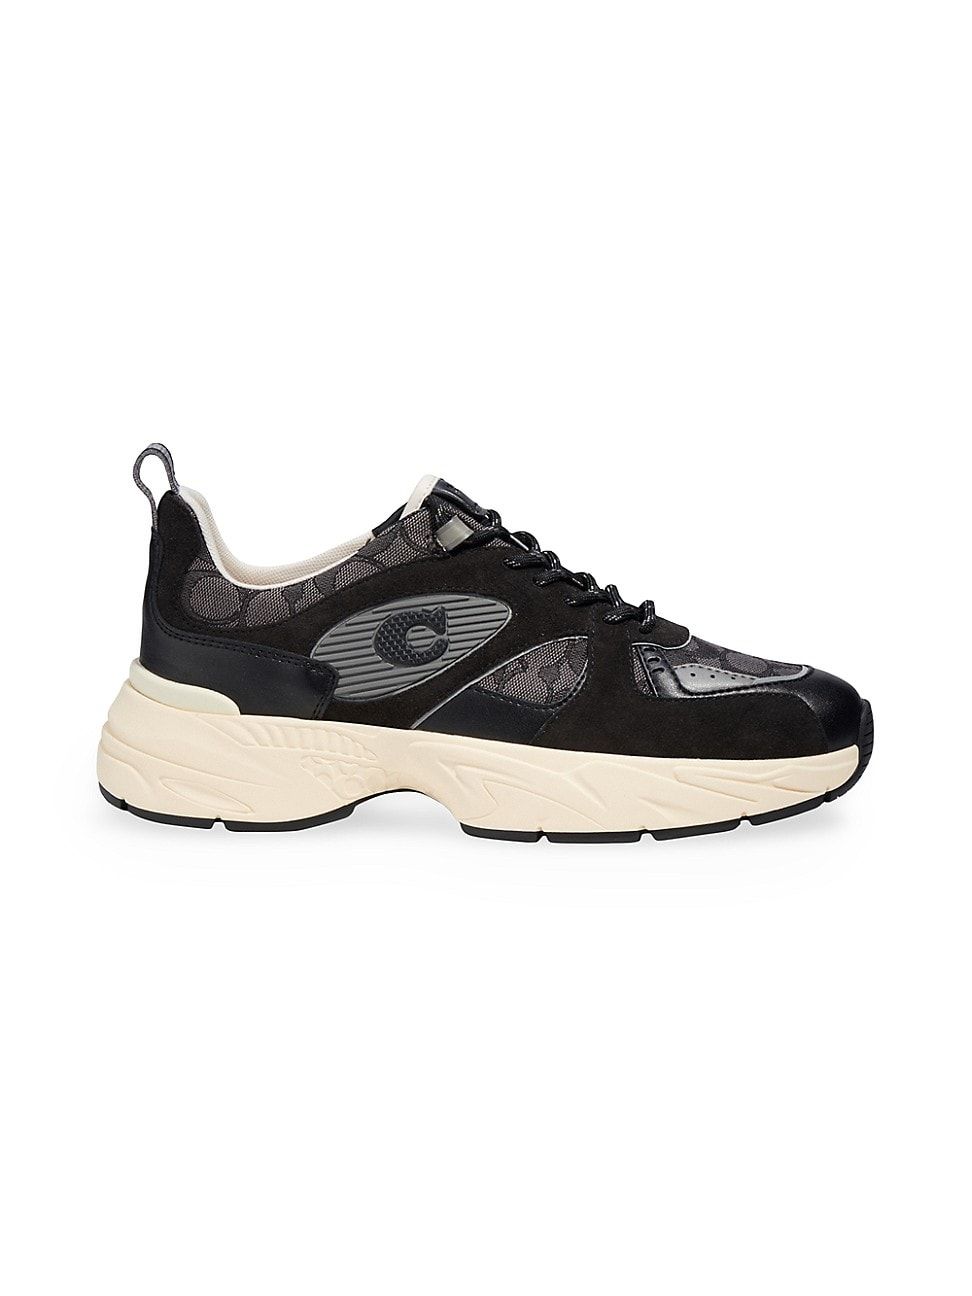 Men's Tech Runner Signature Tech Runner Suede & Leather Sneakers - Black - Size 10 | Saks Fifth Avenue